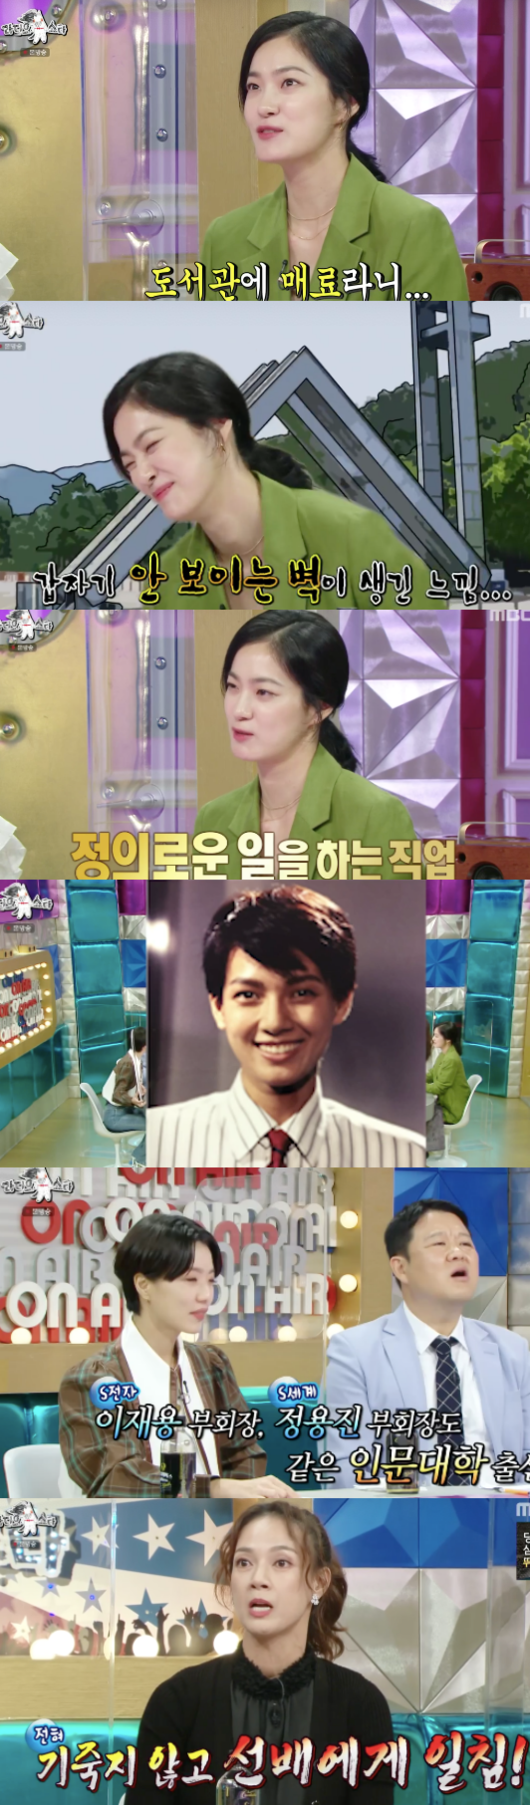 In Radio Star, actor Ok Ja-yeon mentioned the title from Seoul National University.Park Sun-young, Lee Kook-ju, Kyung-ri and Ok Ja-yeon appeared in MBC entertainment Radio Star, which was broadcast on the 1st.Drama Wonderful Rumors and Mine appeared in the actor Ok Ja-yeon.Gim Gu-ra praised the company for saying that any advertisement seems to be the face of cloth when he said that he was well-received as a play model before his debut.He also showed a bloodline acting that seemed to burst in the drama. He said, My acquaintance gave birth and blood was blown, but it was the same as that time, and the broadcast was refined and gone.Ok Ja-yeon said that Kim Seo-hyung, who shared Mine, is a style of outwardness. I have been told that the seniors who met in the bathroom are lonely, and I have been through it.I want to know Kim Seo-hyungs phone number, but I cant ask him until its over, and I got a call yesterday, Im so glad to hear from him later, Ill meet him tomorrow, he said.Above all, Ok Ja-yeon, who is from Seoul National University,My parents were teachers, and I said, I did not do anything else in class because all of my teachers were like parents.When asked how he was sleepy, he said, I sleep a lot at night, I was like a friend and a library for the first time in junior high school, and I was fascinated by the space. Gim Gu-ra laughed when he said, I feel a lot away.He also said that he was fat when he said that he was the first in high school. He was surprised to hear an anecdote that he did not miss the first place all the time.Ok Ja-yeon, who continued to play and became an actor, said, It is too burdensome, I heard what the child who was studying at Daehangno is acting. The excessive interest is burdensome.In the meantime, Salary, who is the highest person among the senior college graduates of Seoul National University, was surprised to add that the aesthetics came from the same department as Bang Si-hyuk, Lee Jae-yong and vice chairman Jung Yong-jin.Capture the Radio Star screen